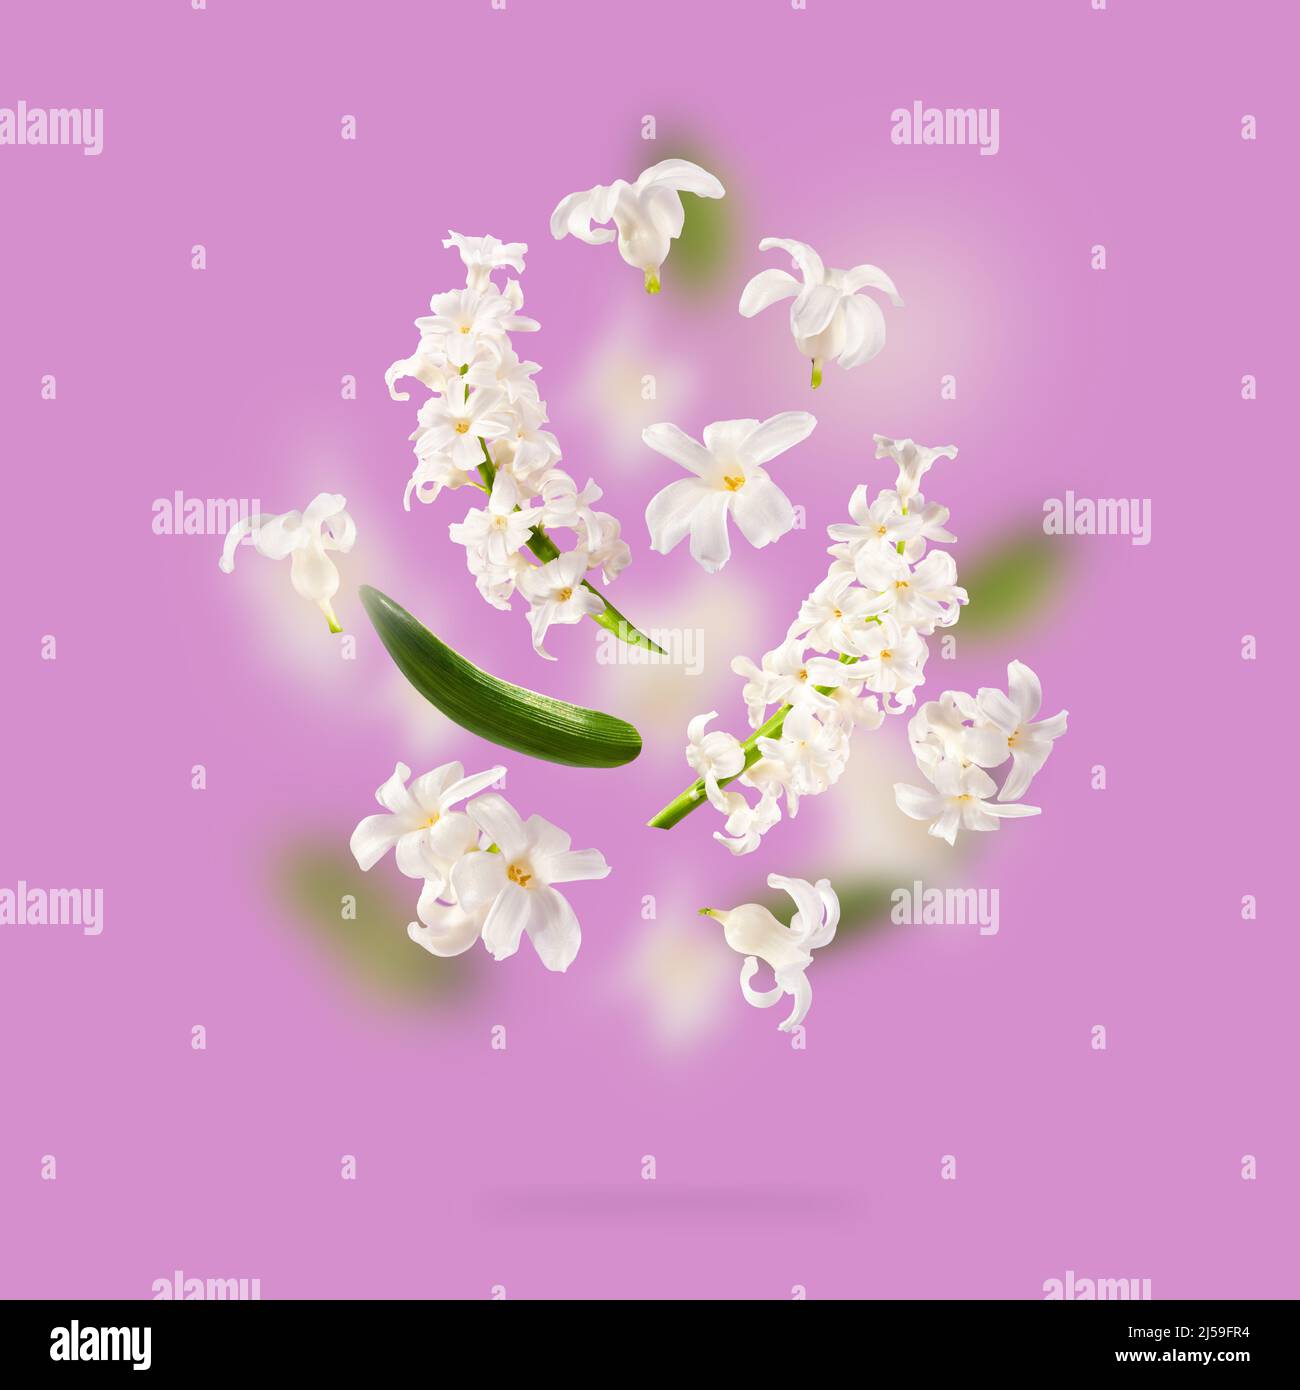 A beautiful picture with white hyacinth flowers flying in the air on the violet purple lavender background. Levitation concept. Floating petals. Stock Photo